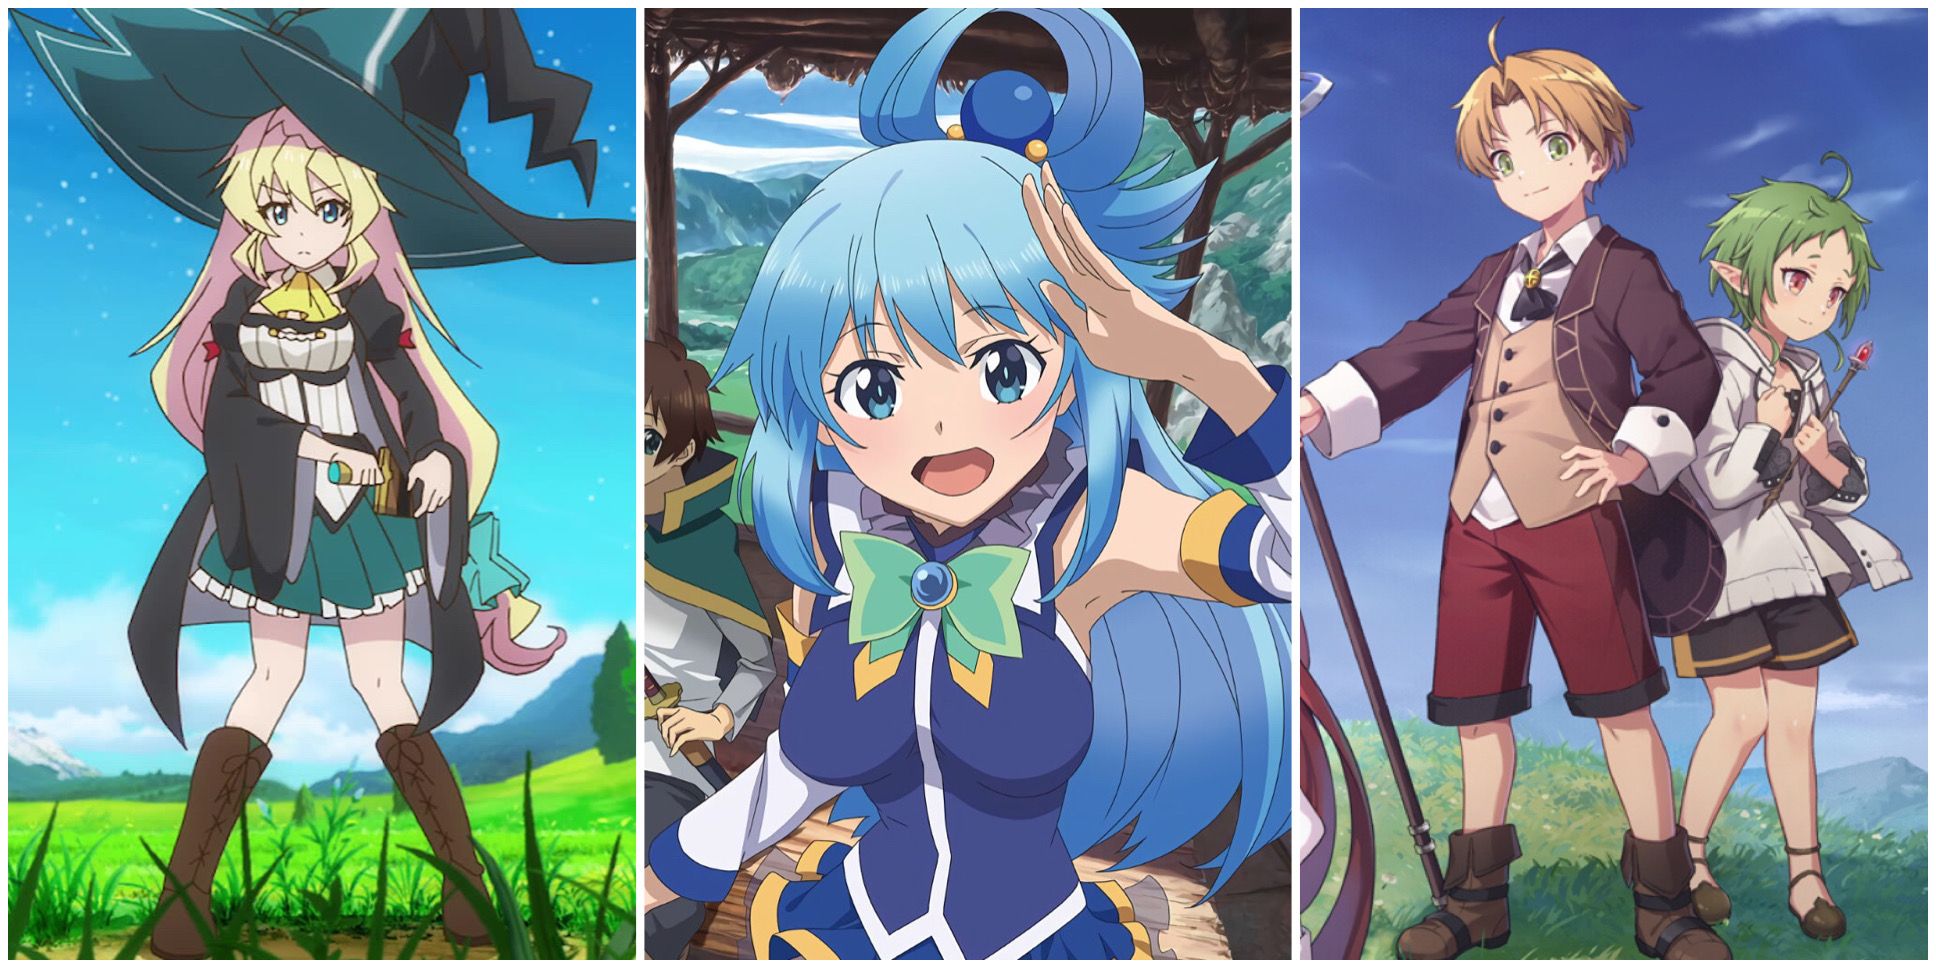 What are the Isekai anime where MC is not OP other than KonoSuba